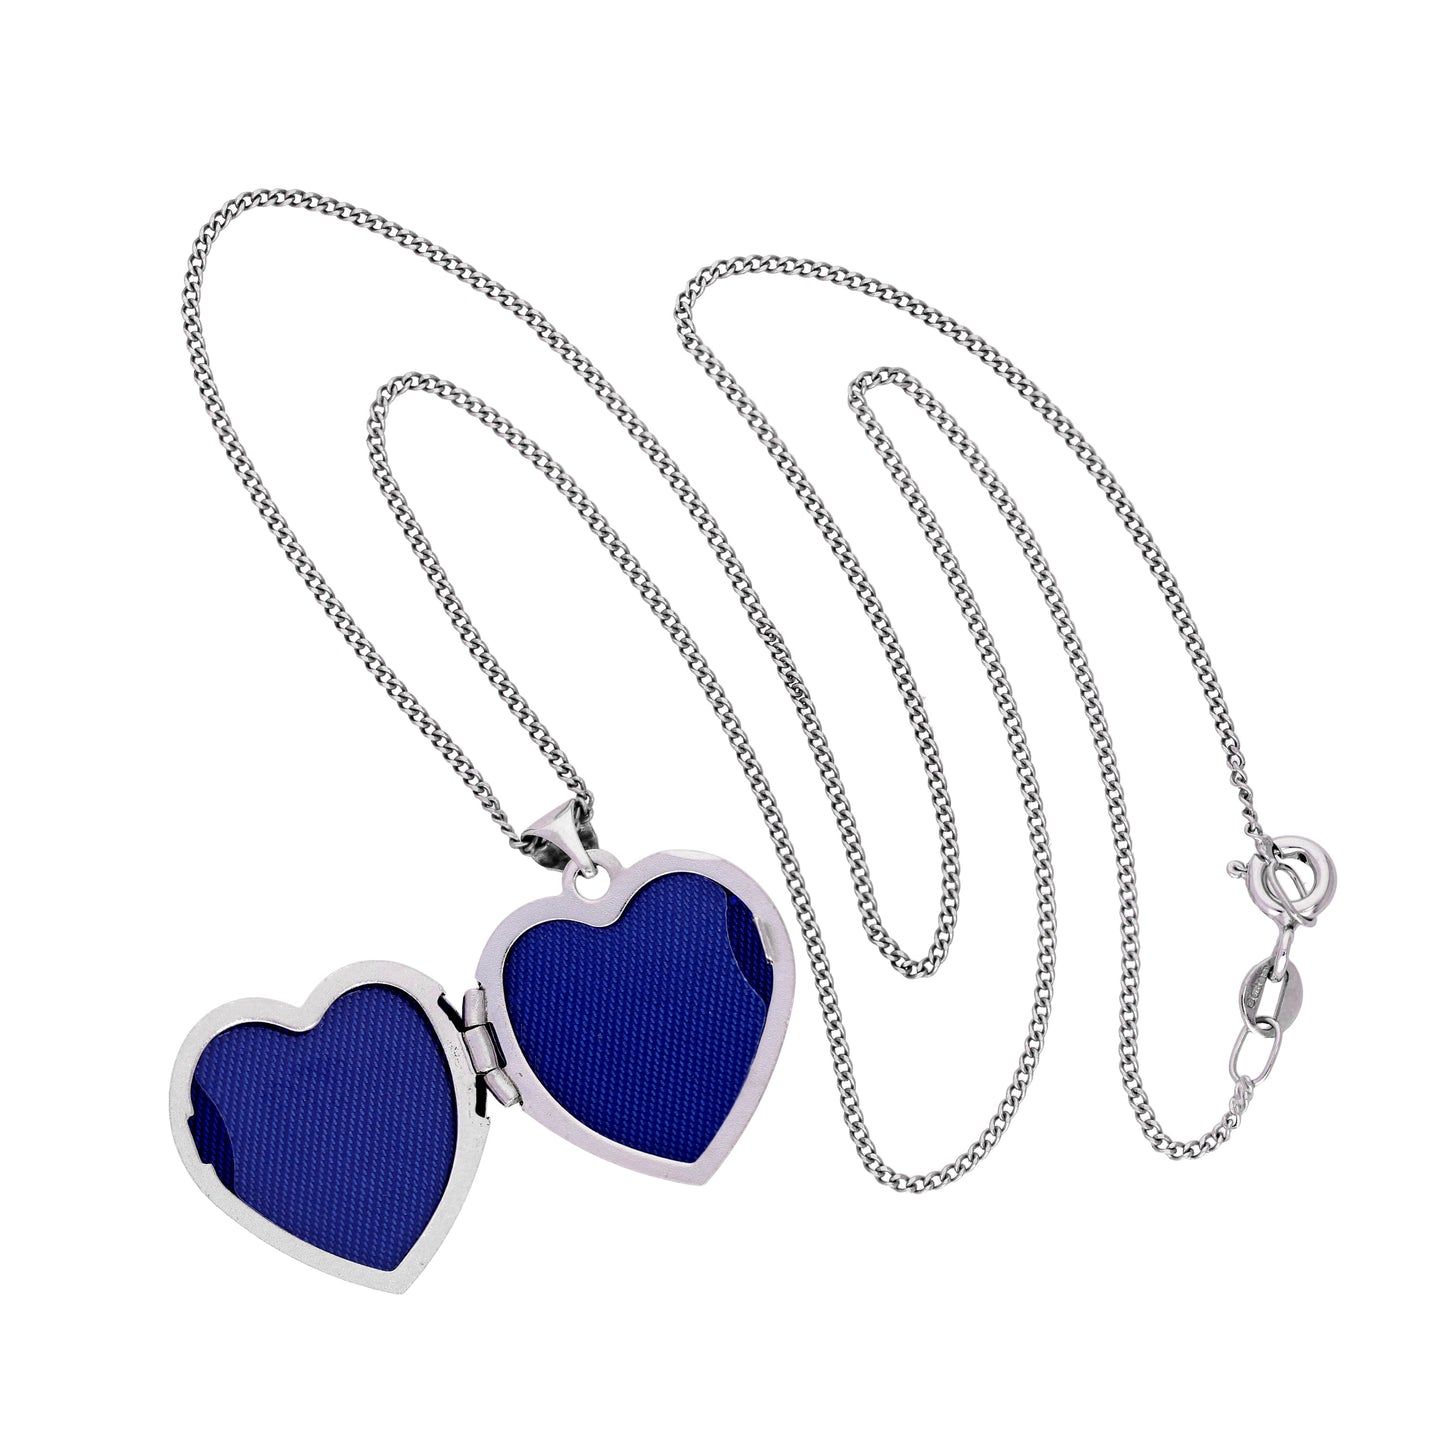 9ct White Gold Heart Love Locket on Chain 16 - 18 Inches